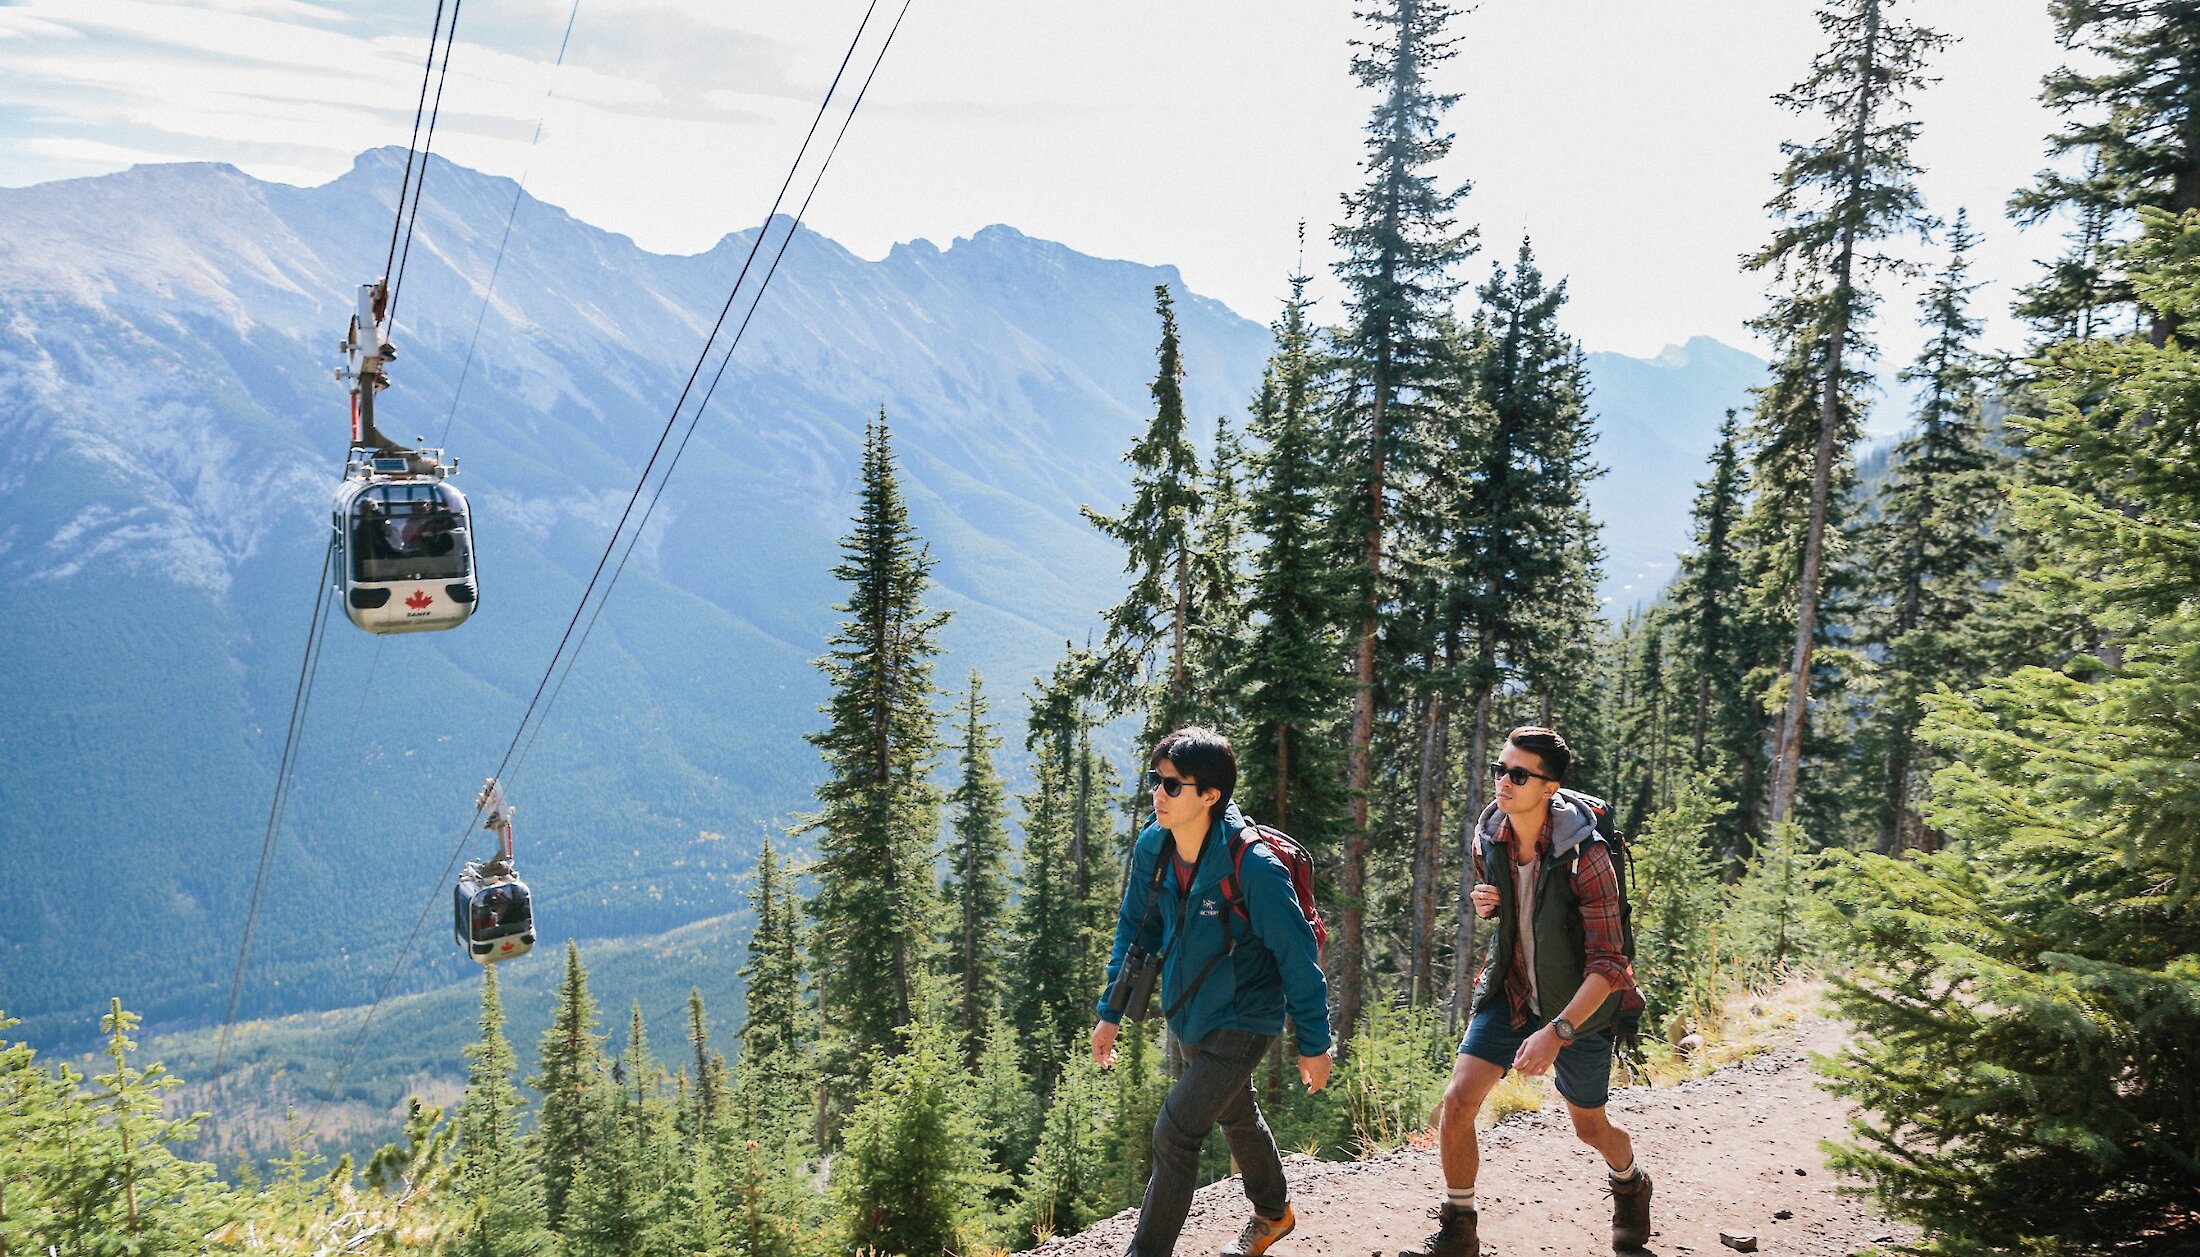 Soar to new heights on the Banff Gondola in summer